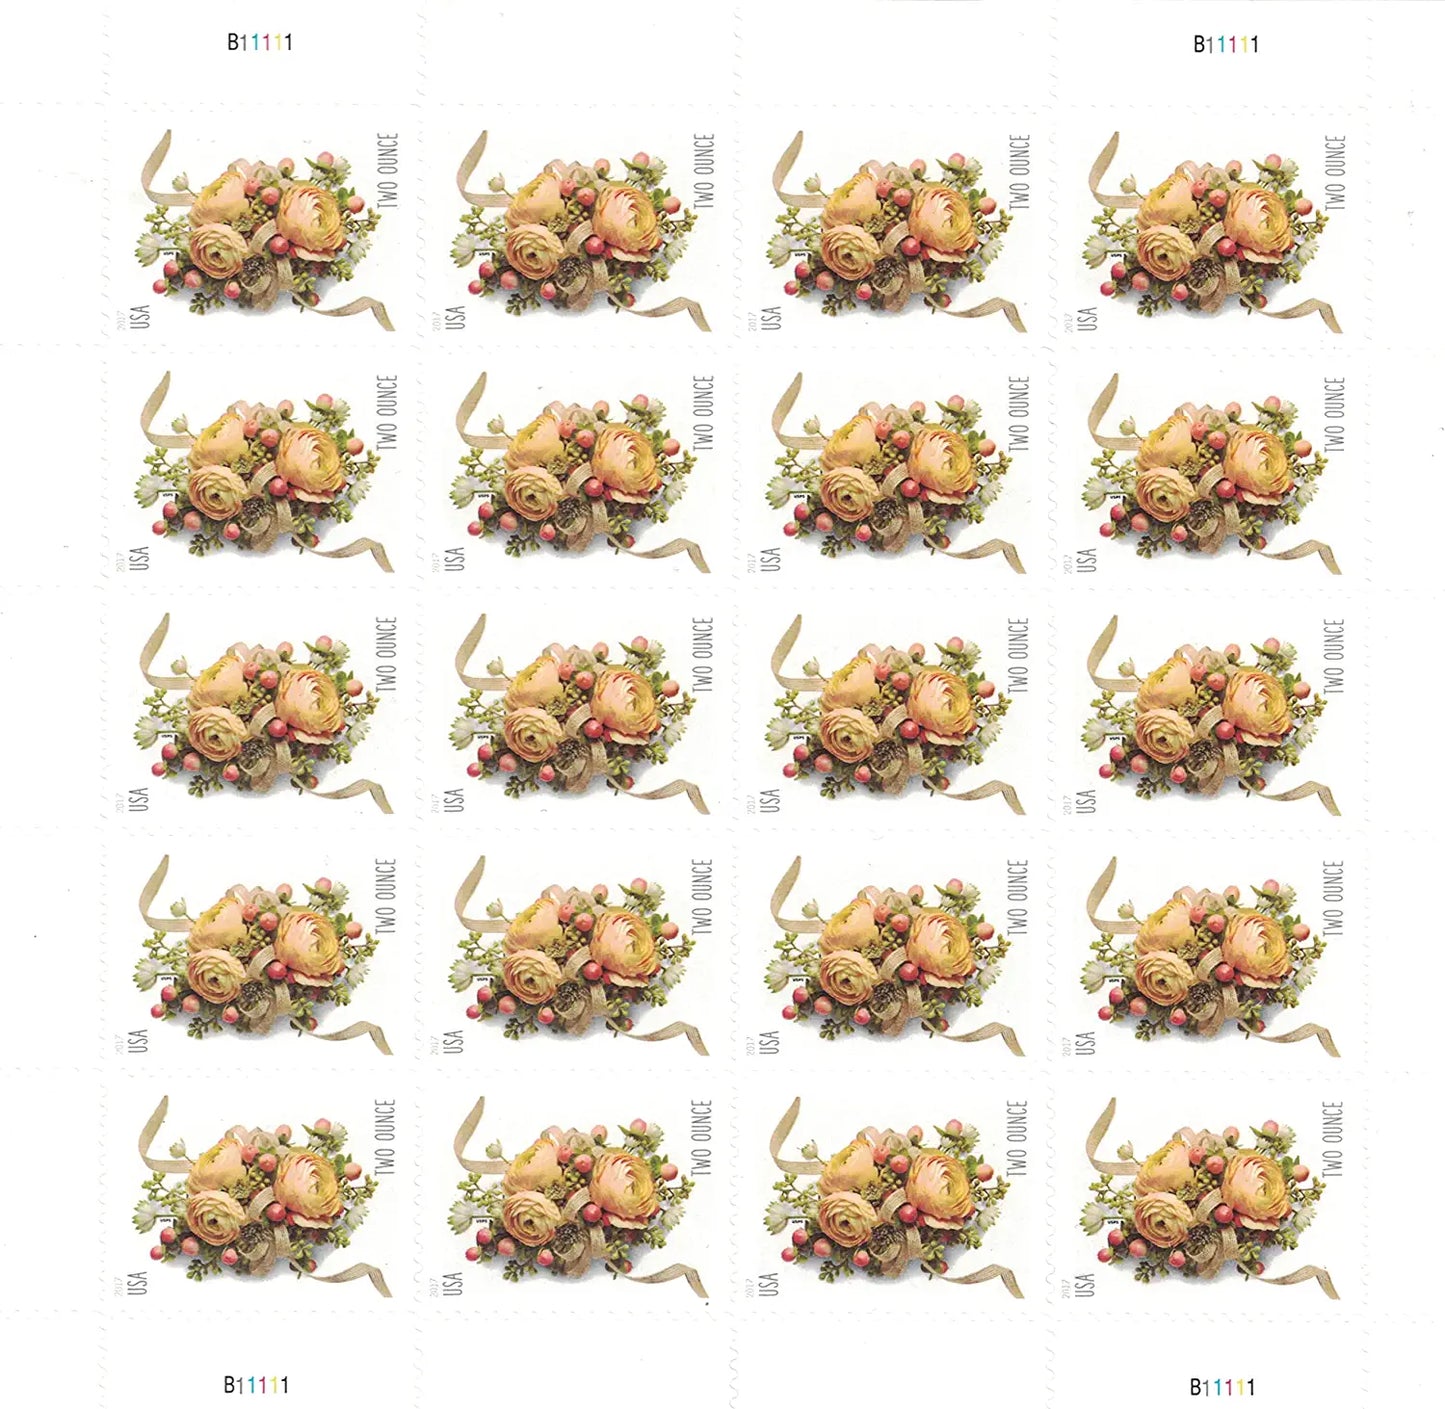 USPS Celebration Corsage Two Ounce 2017 Forever Stamps - Booklet of 20 Postage Stamps - For Birthdays, Weddings, Anniversaries, and Other Celebrations